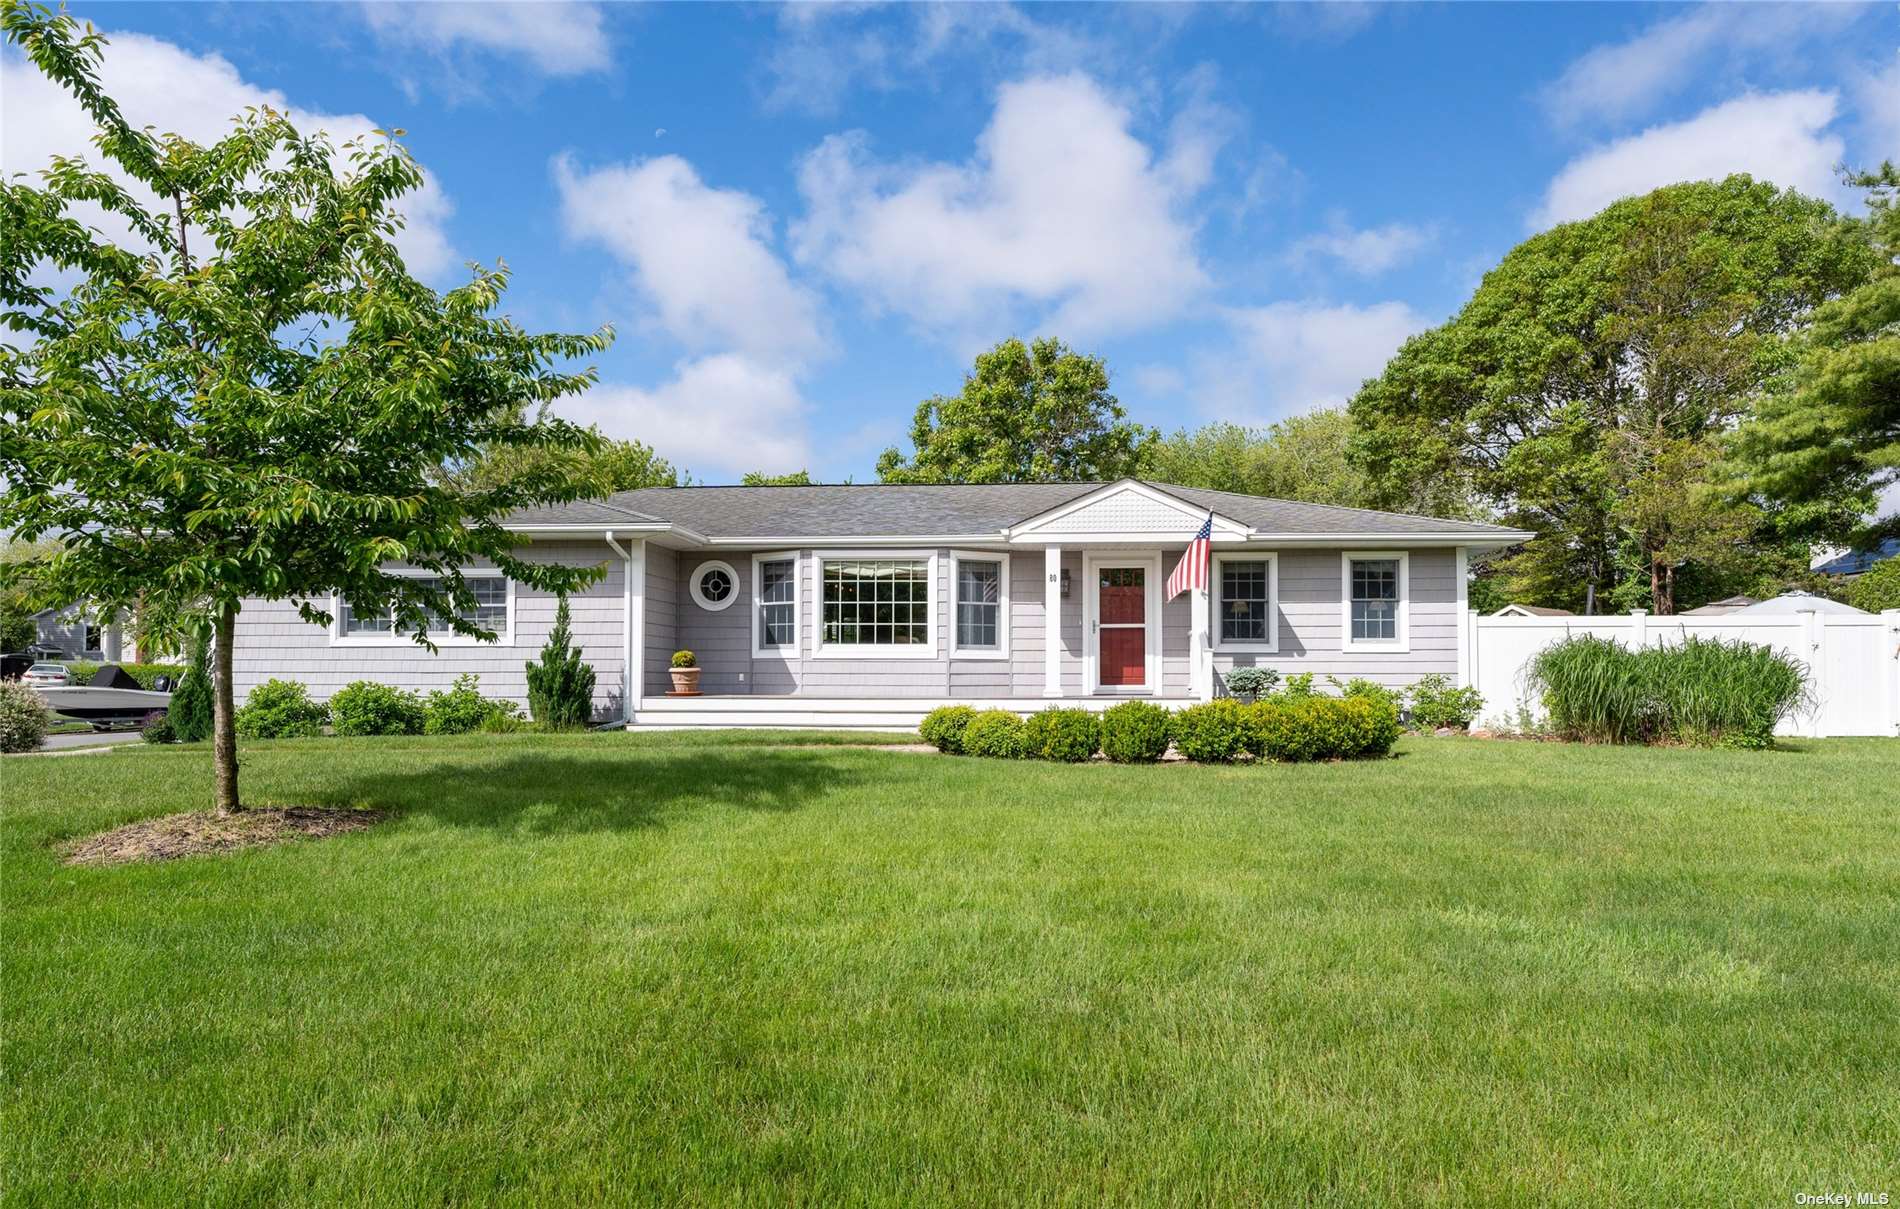 80 Pine Edge Drive, East Moriches, Hamptons, NY - 2 Bedrooms  
3 Bathrooms - 